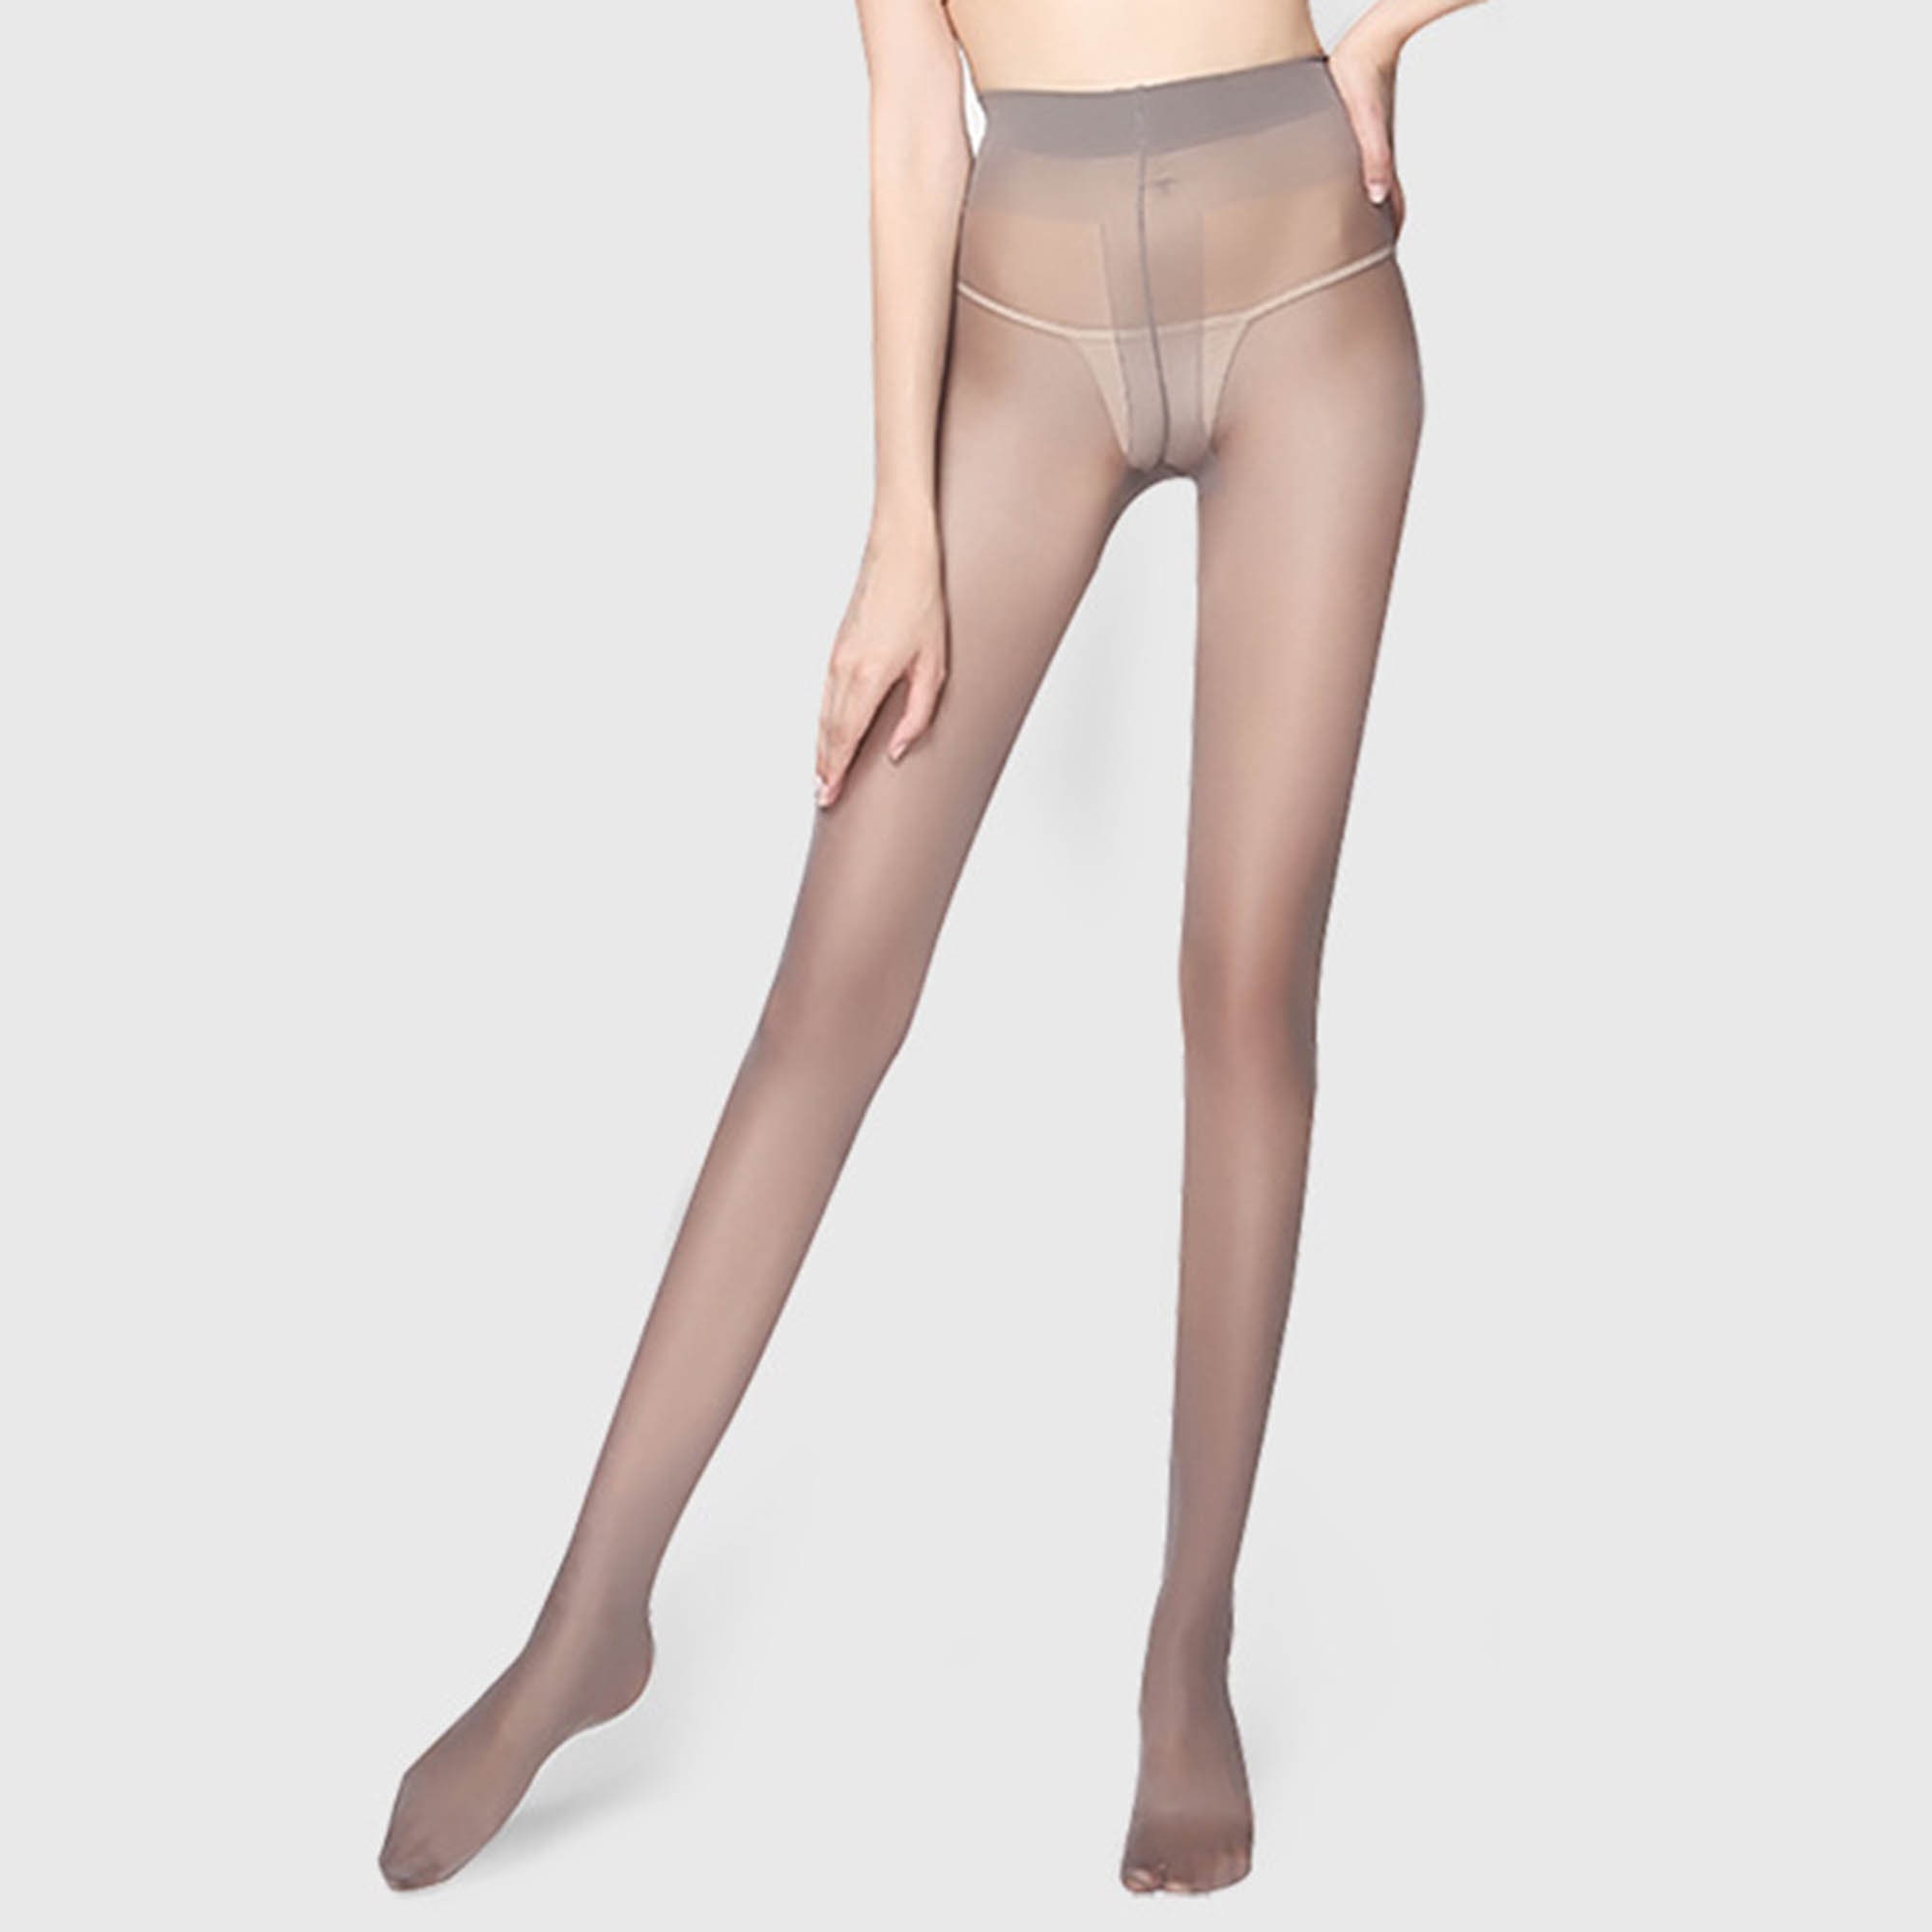 Buy Plus Size Seamless Sheer to Waist Pantyhose Online In India